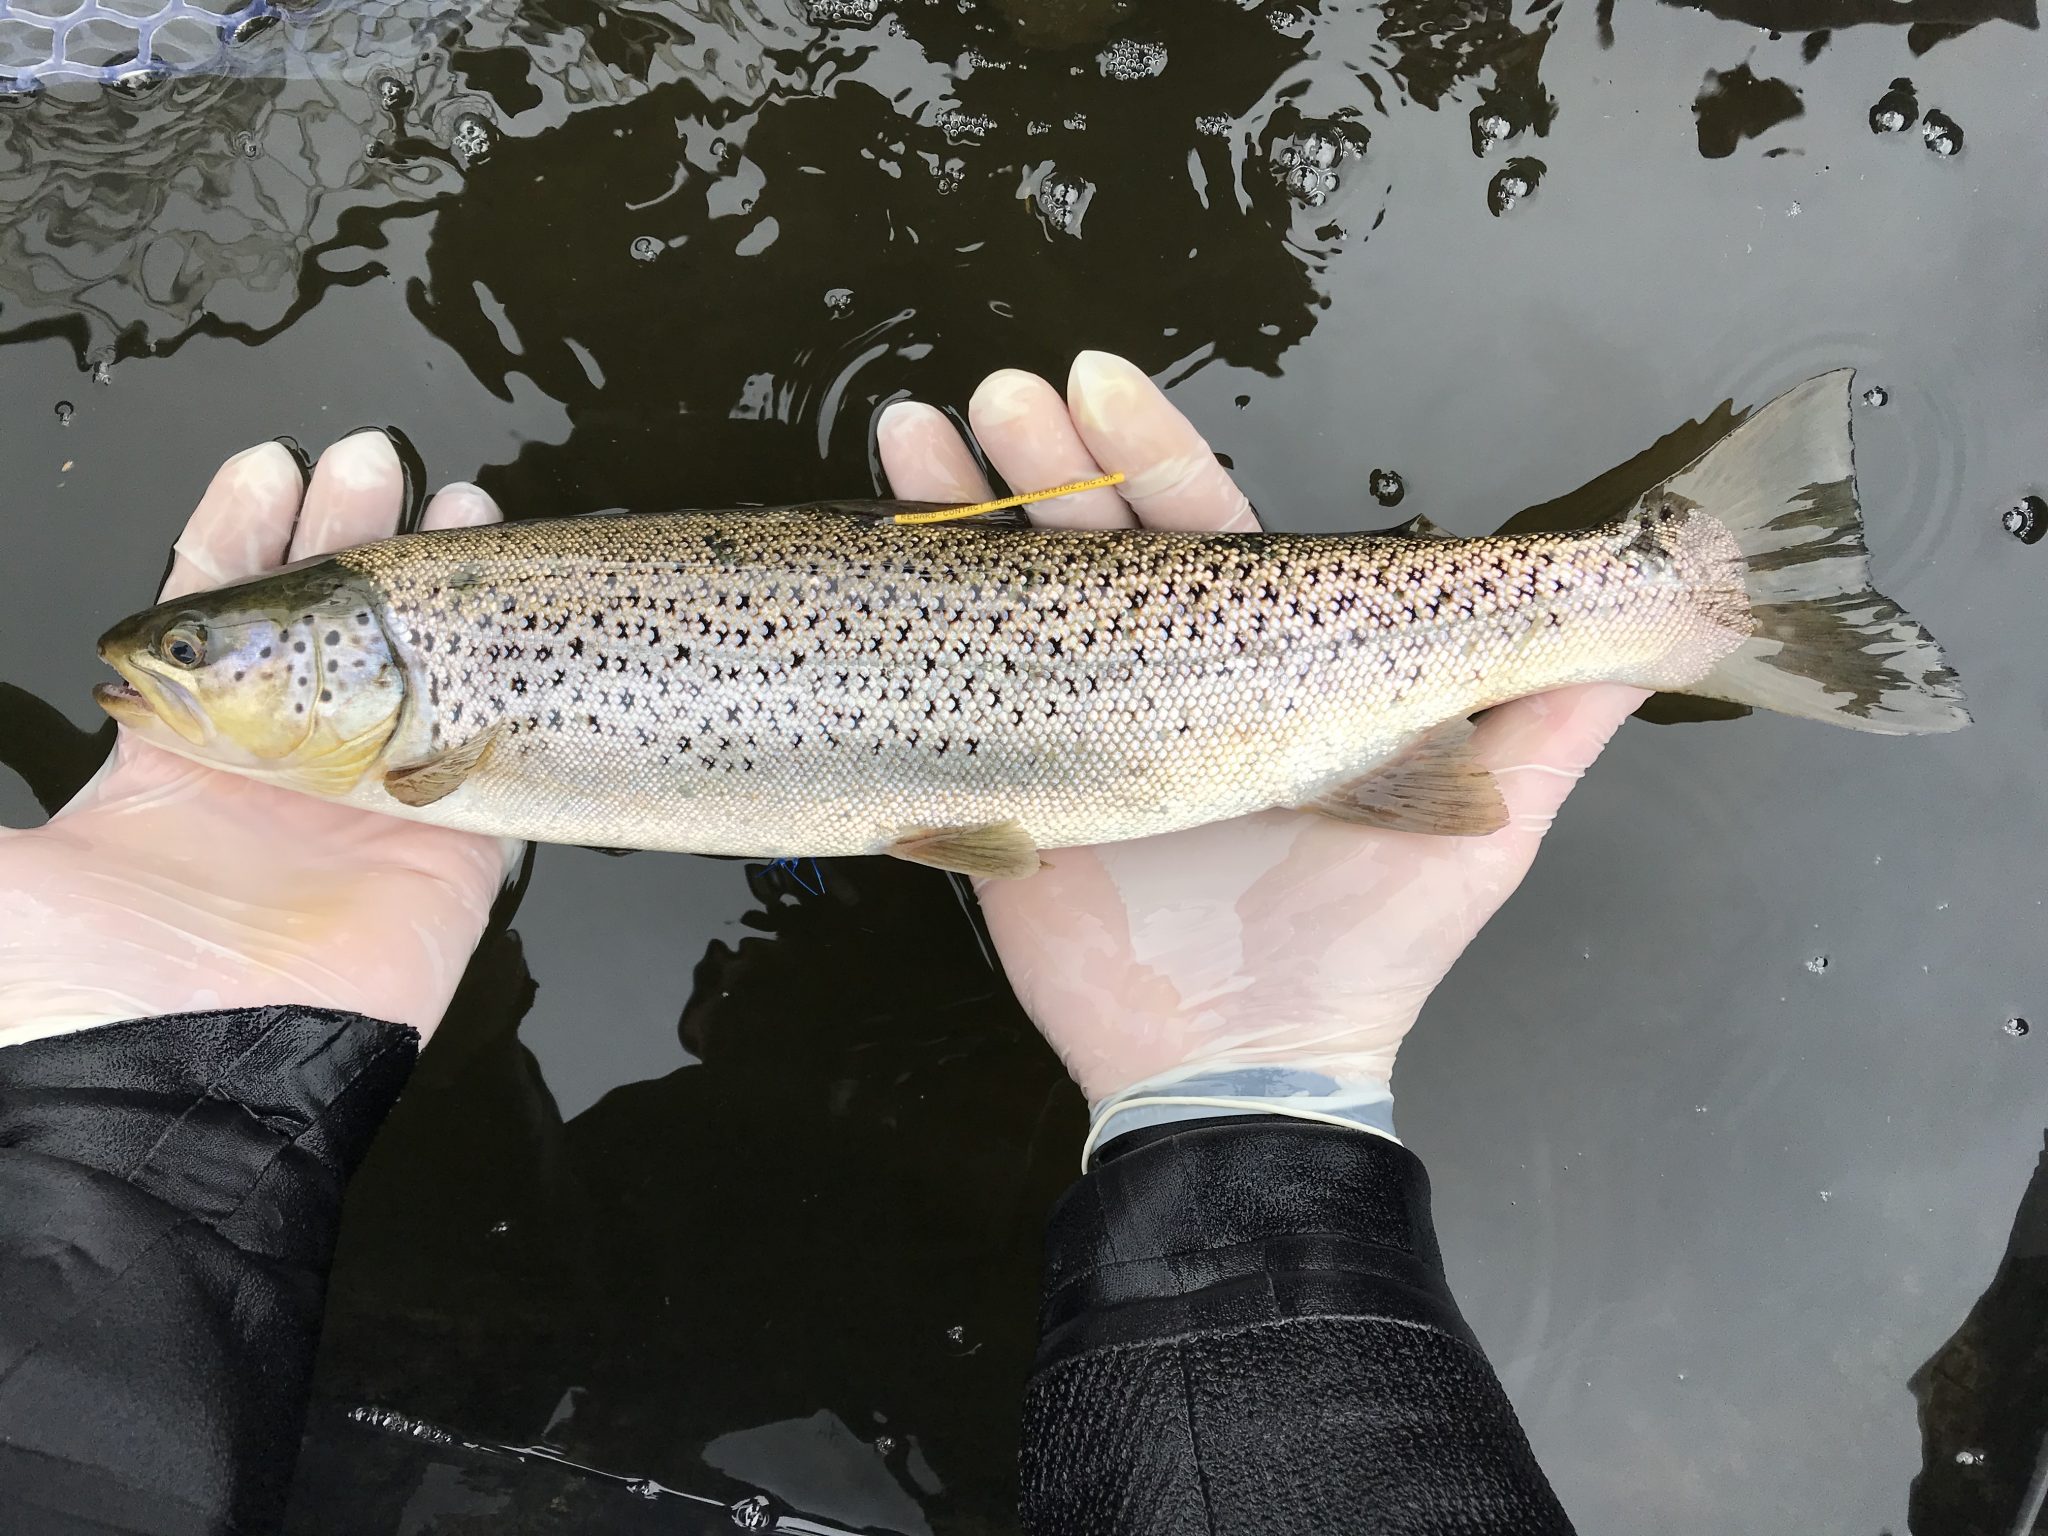 A salmon being held in two hands